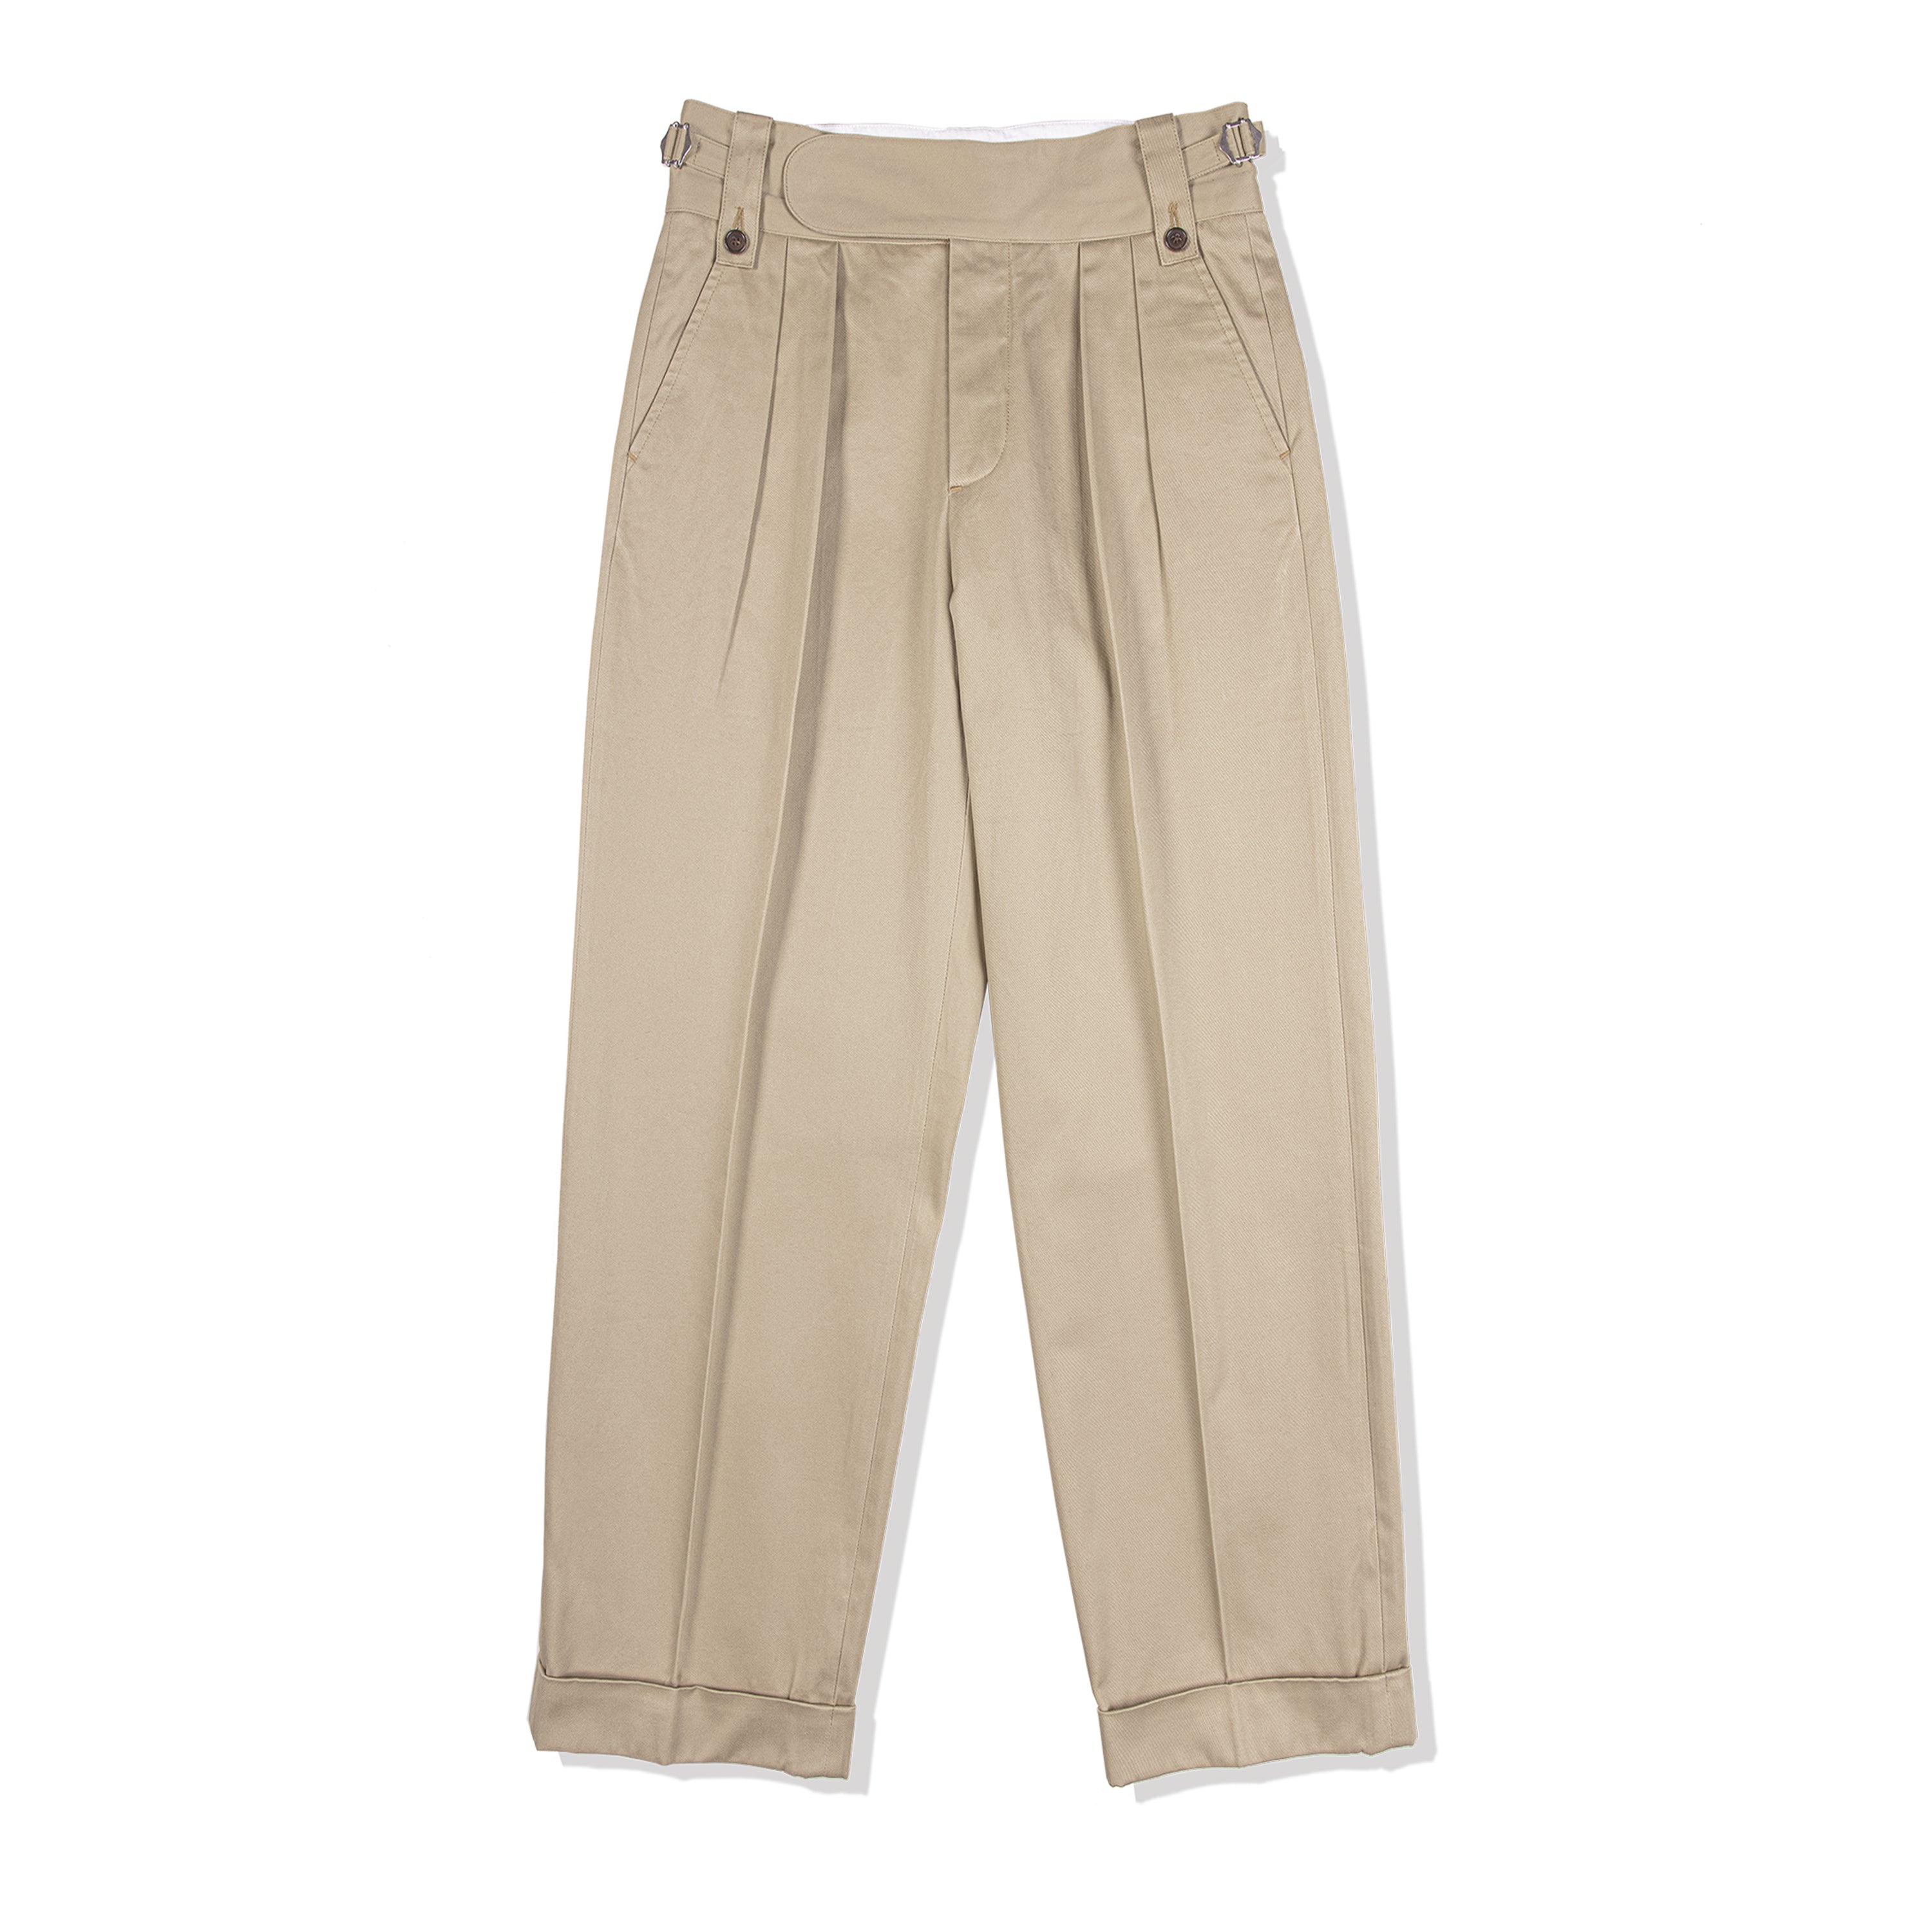 Red Wind High Waist Retro Tooling Pants for Men